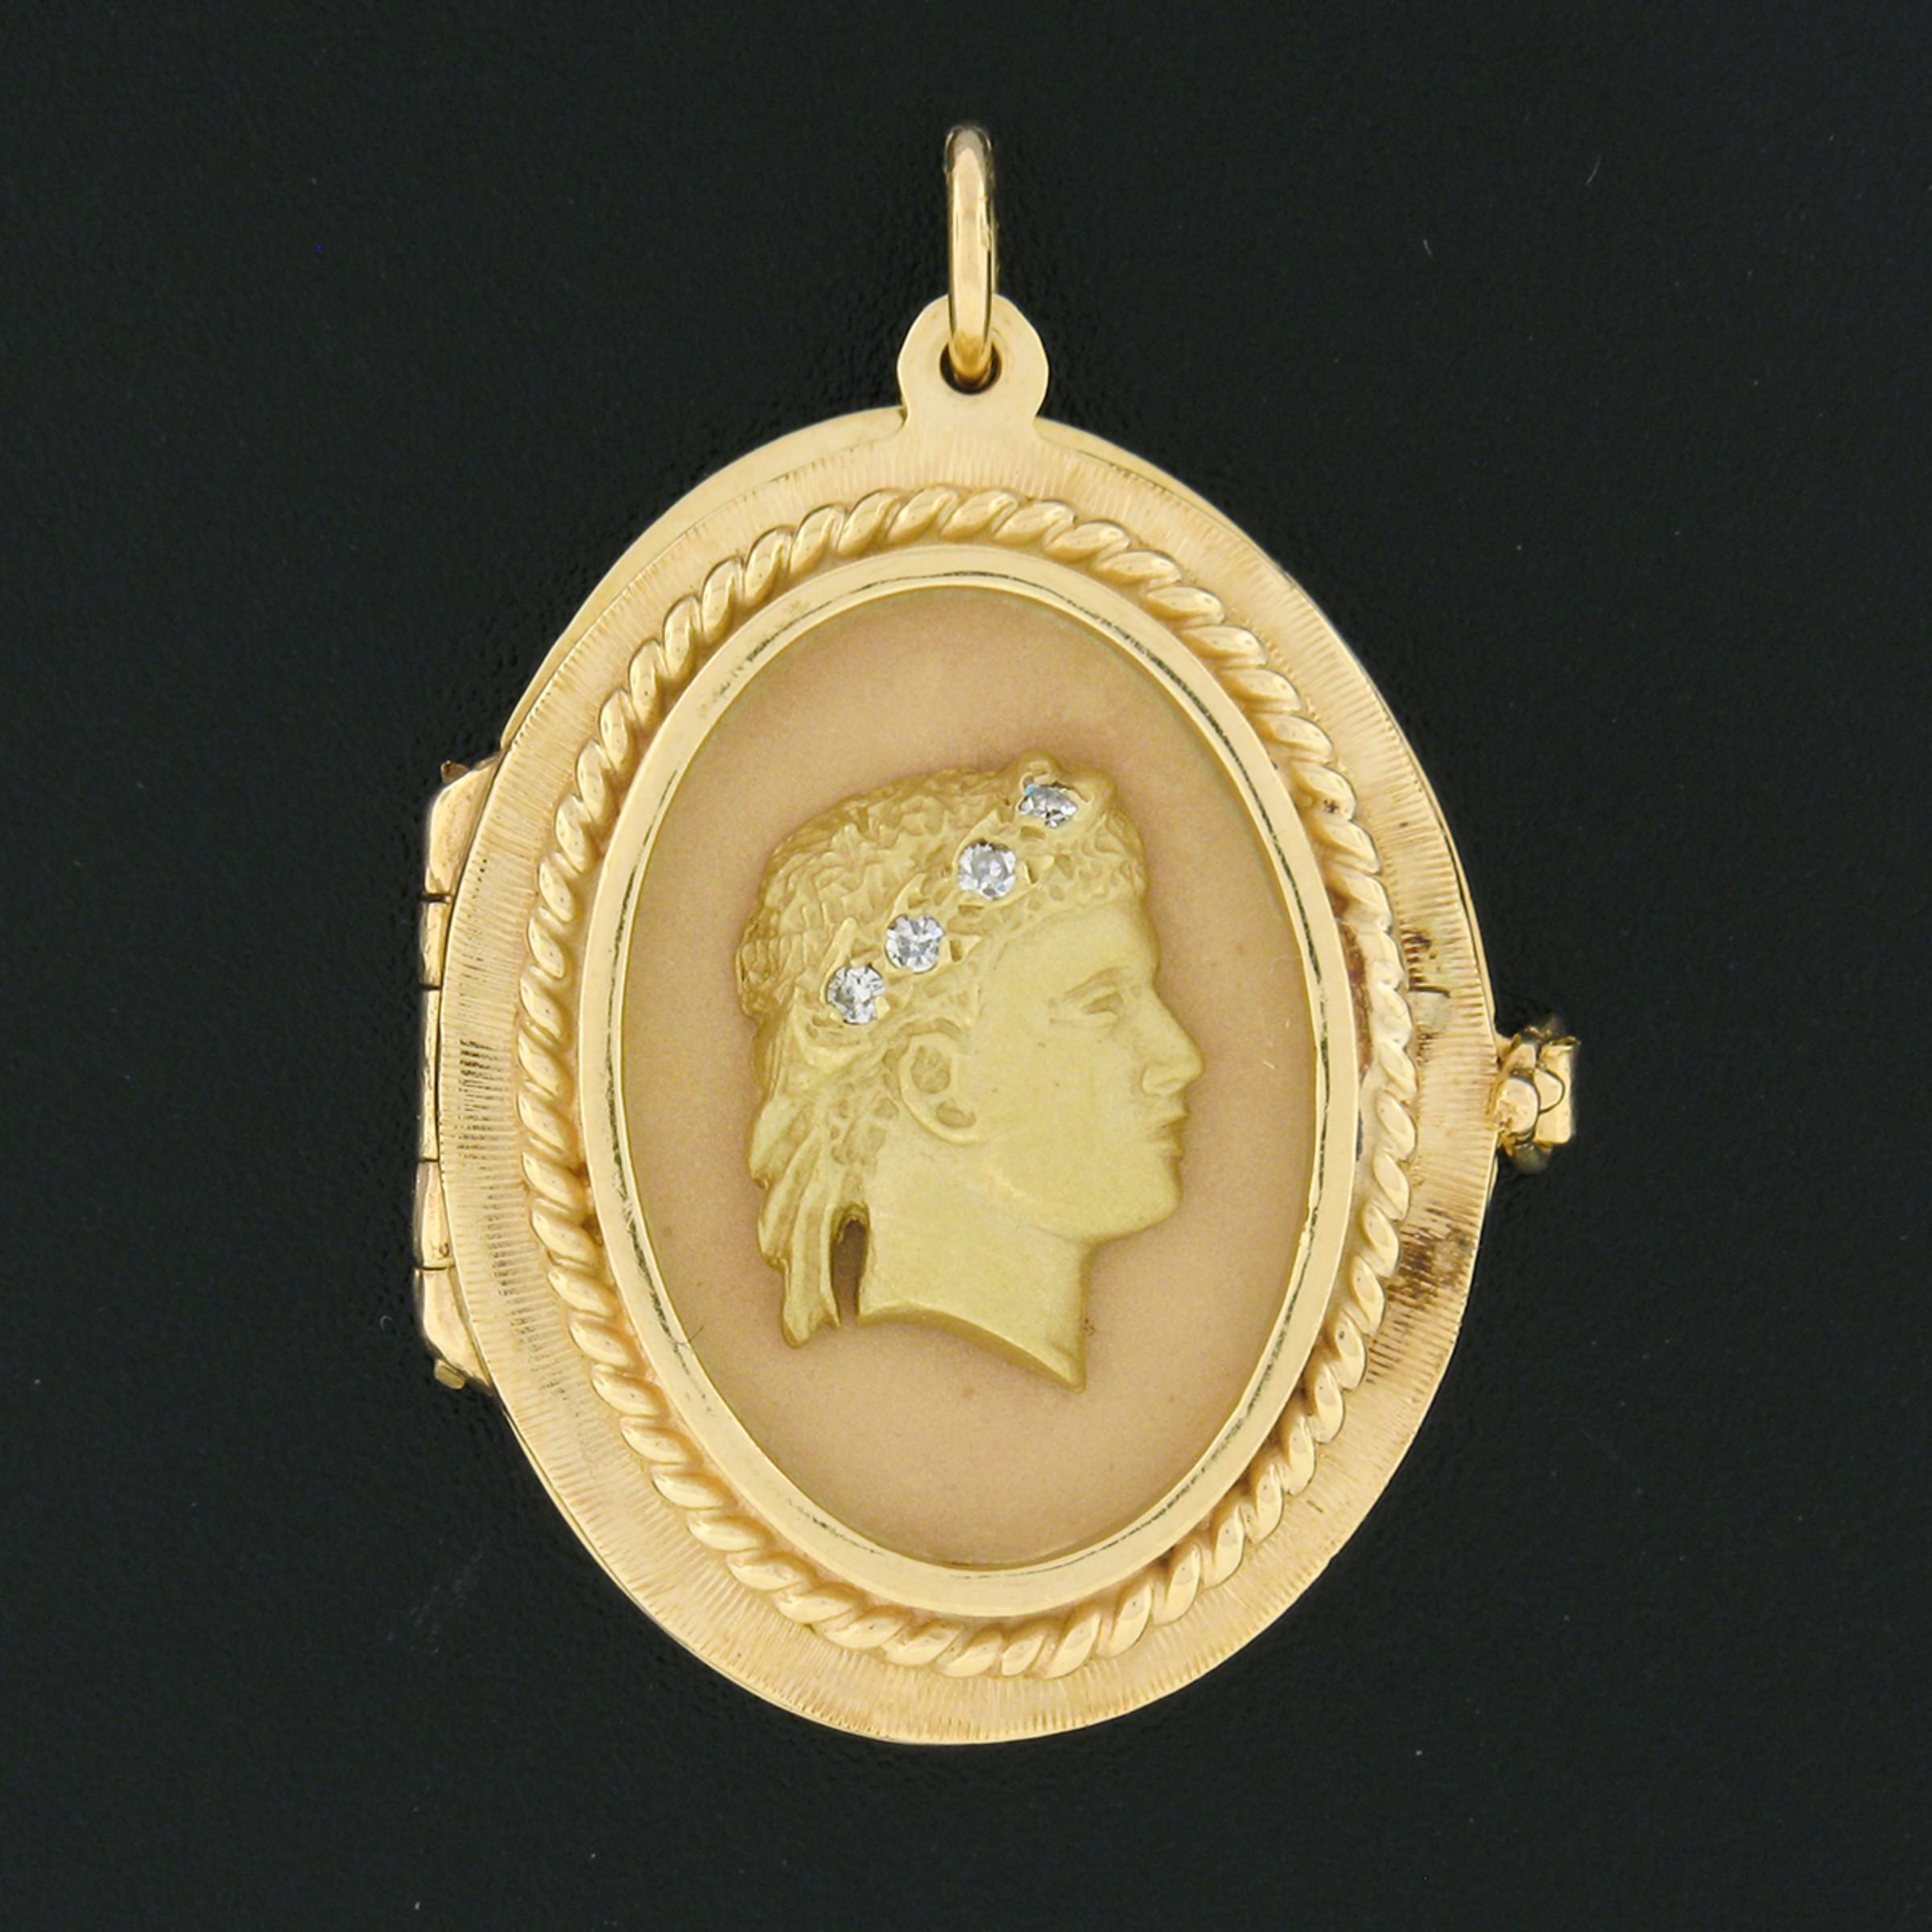 This outstanding vintage locket pendant is crafted in solid 14k yellow gold and features a well carved cameo in matte finish at its center. The detailed cameo shows a portrait of a male wearing a crown that is lined with fine diamonds. The single